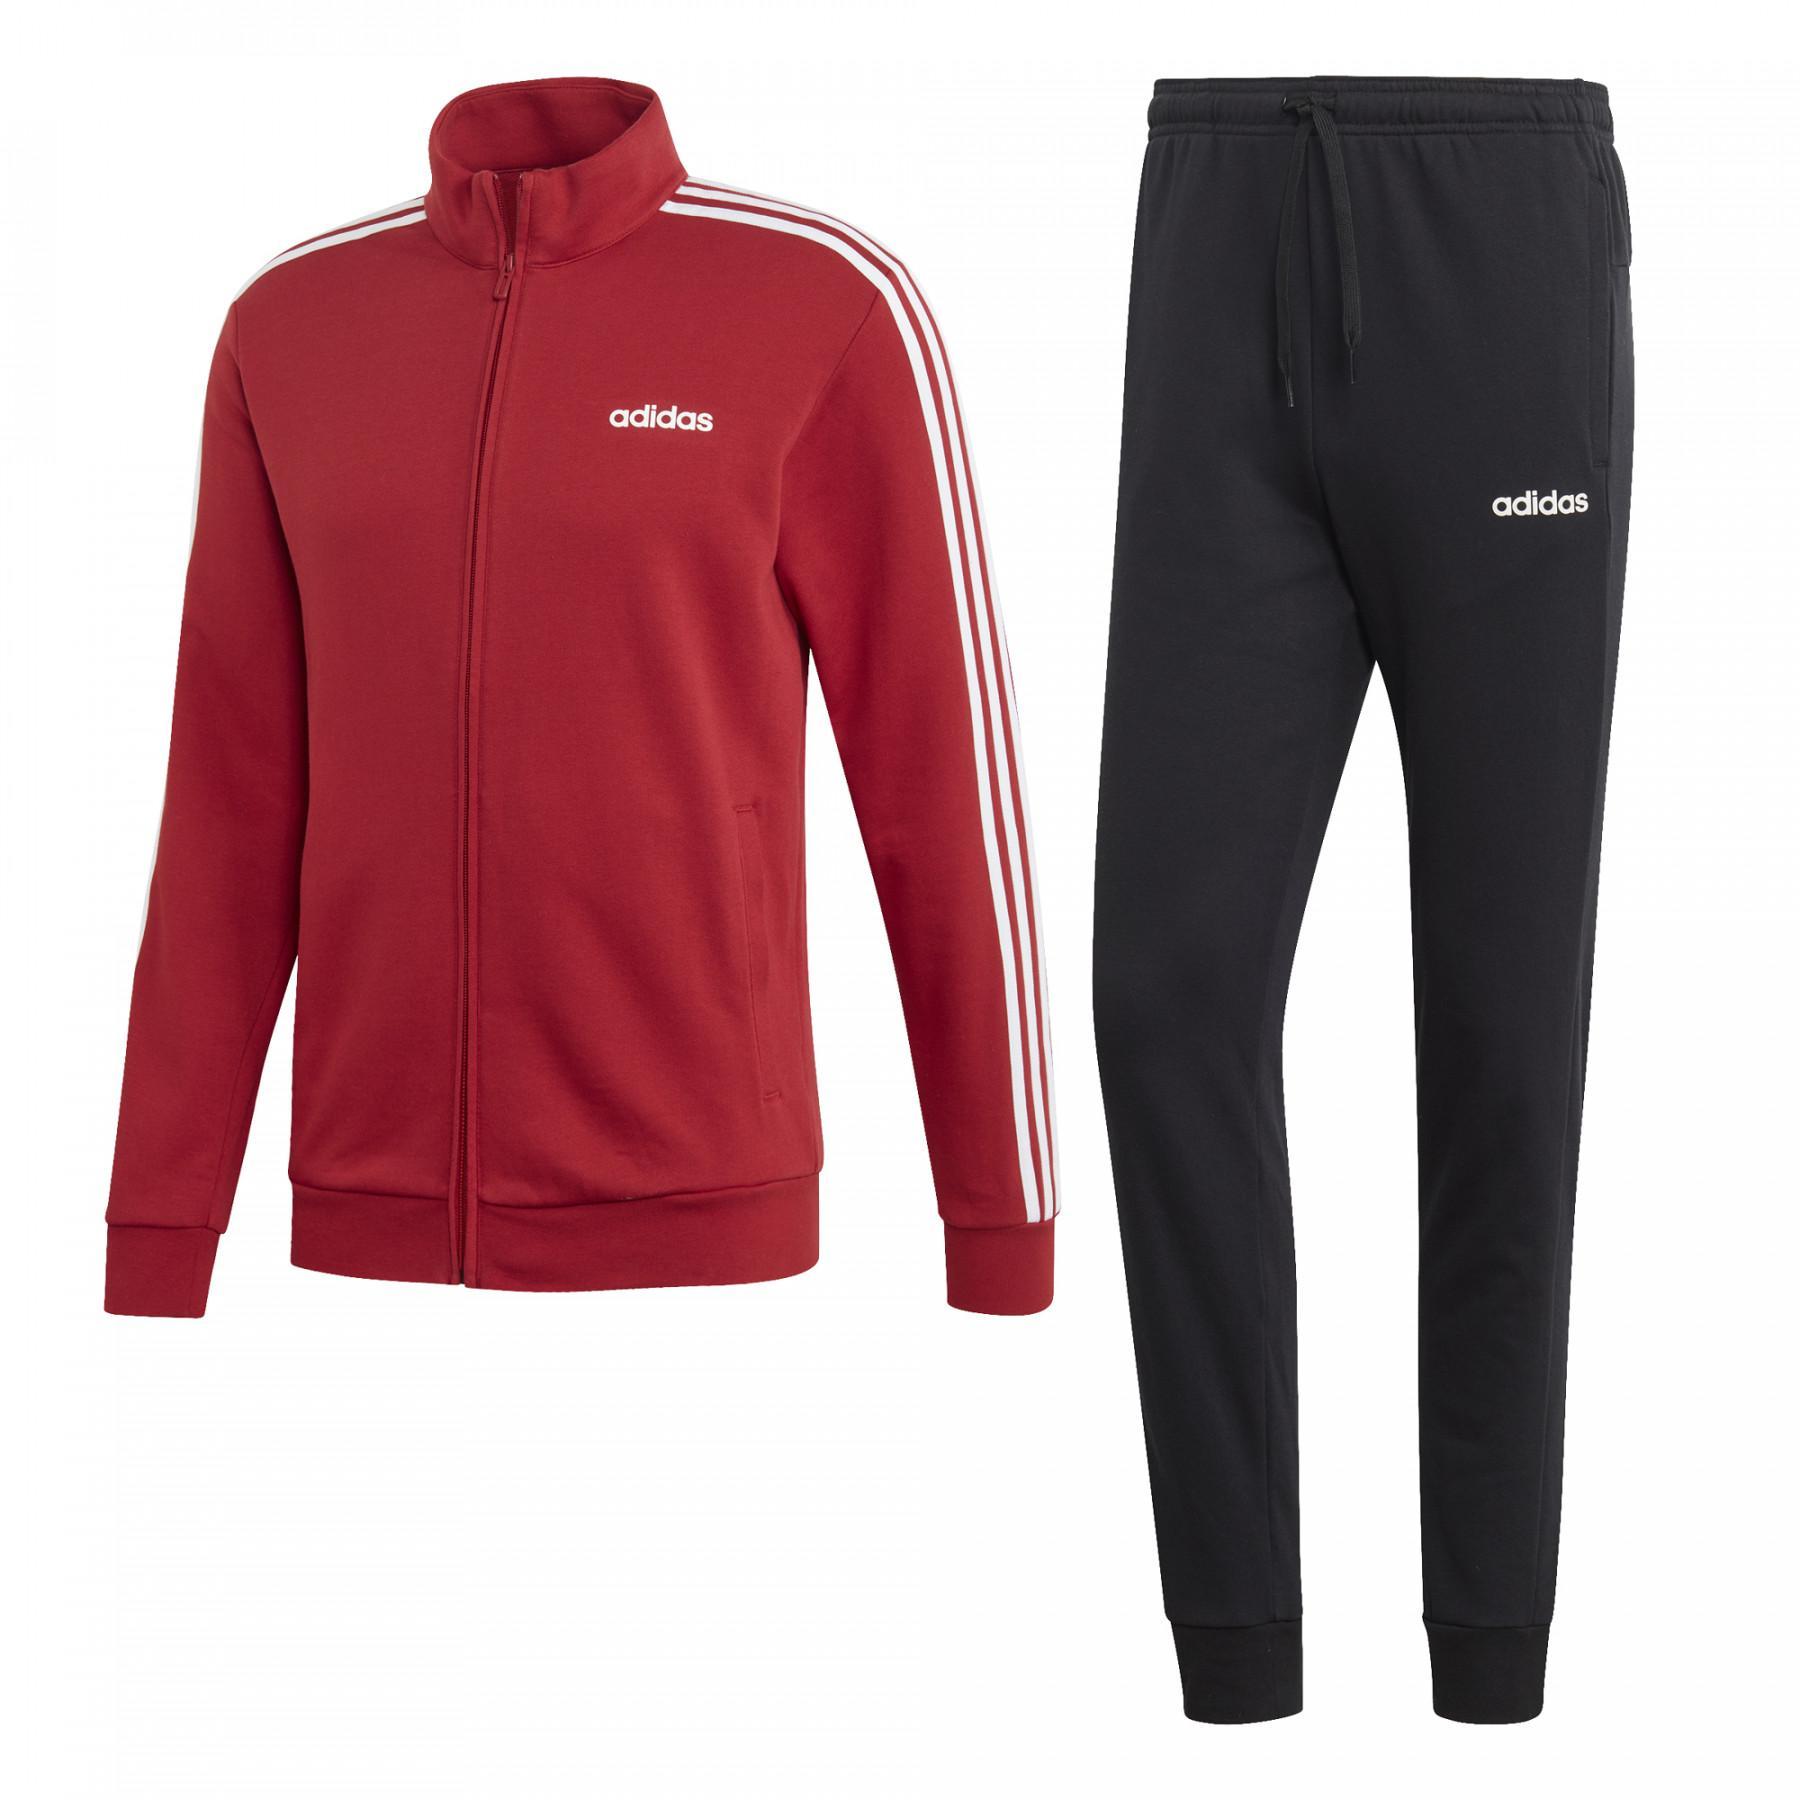 Tracksuit adidas - Tracksuits - Men's Clothing - Fitness